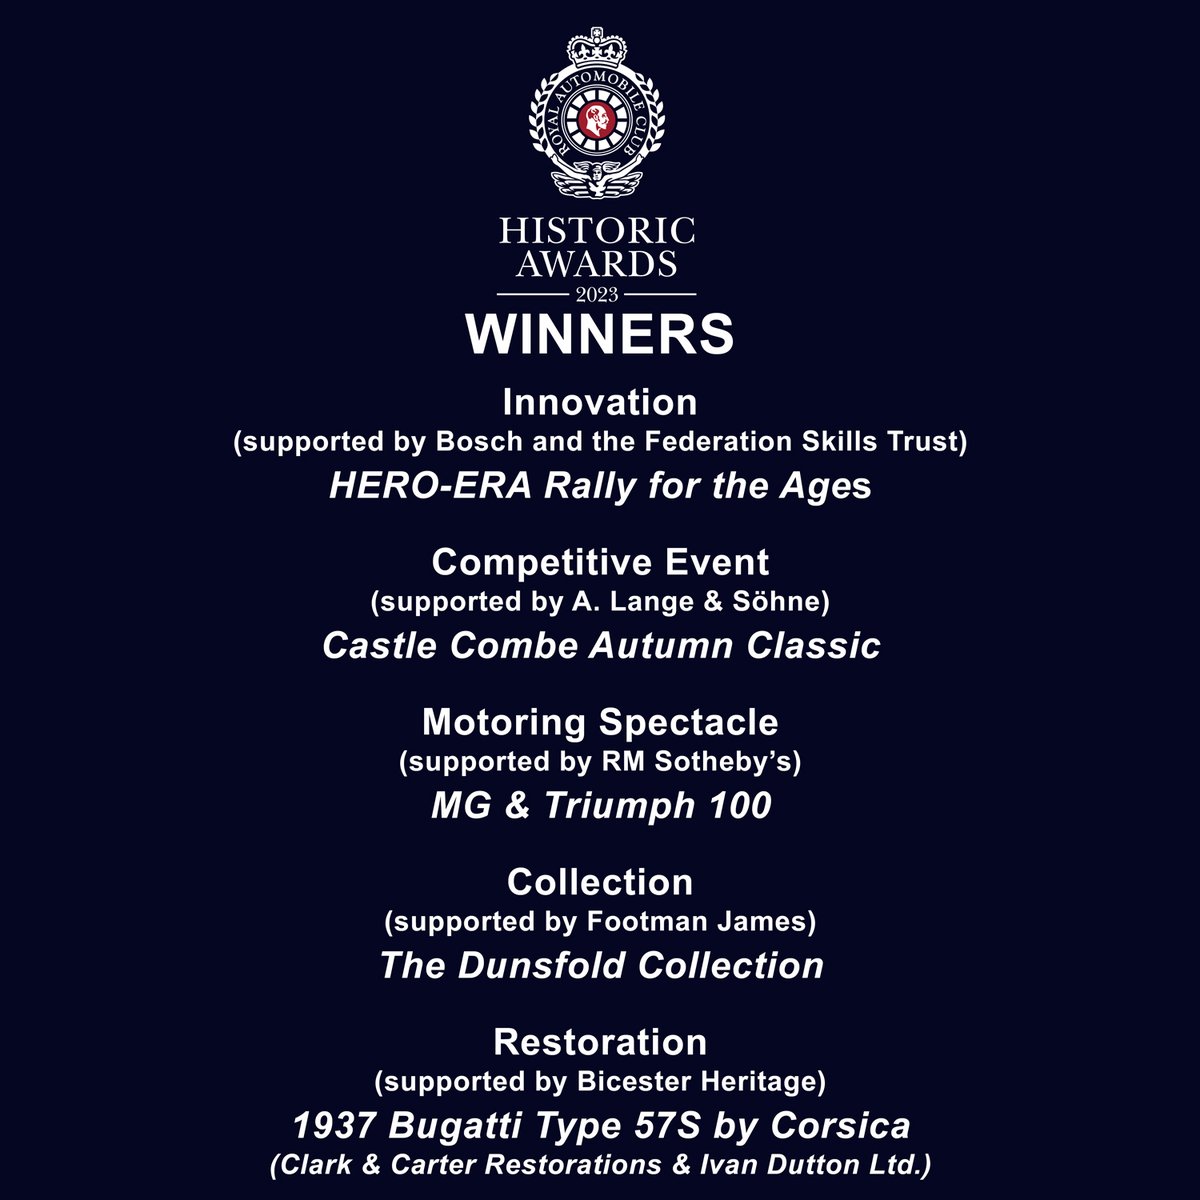 Thank you to our fantastic panels of expert judges, our superb finalists, our category partners and all who came along to Pall Mall to celebrate the very best of the best. And, once again, huge congratulations to all of our very worthy winners! @RoyalAutomobile @themotoringnews